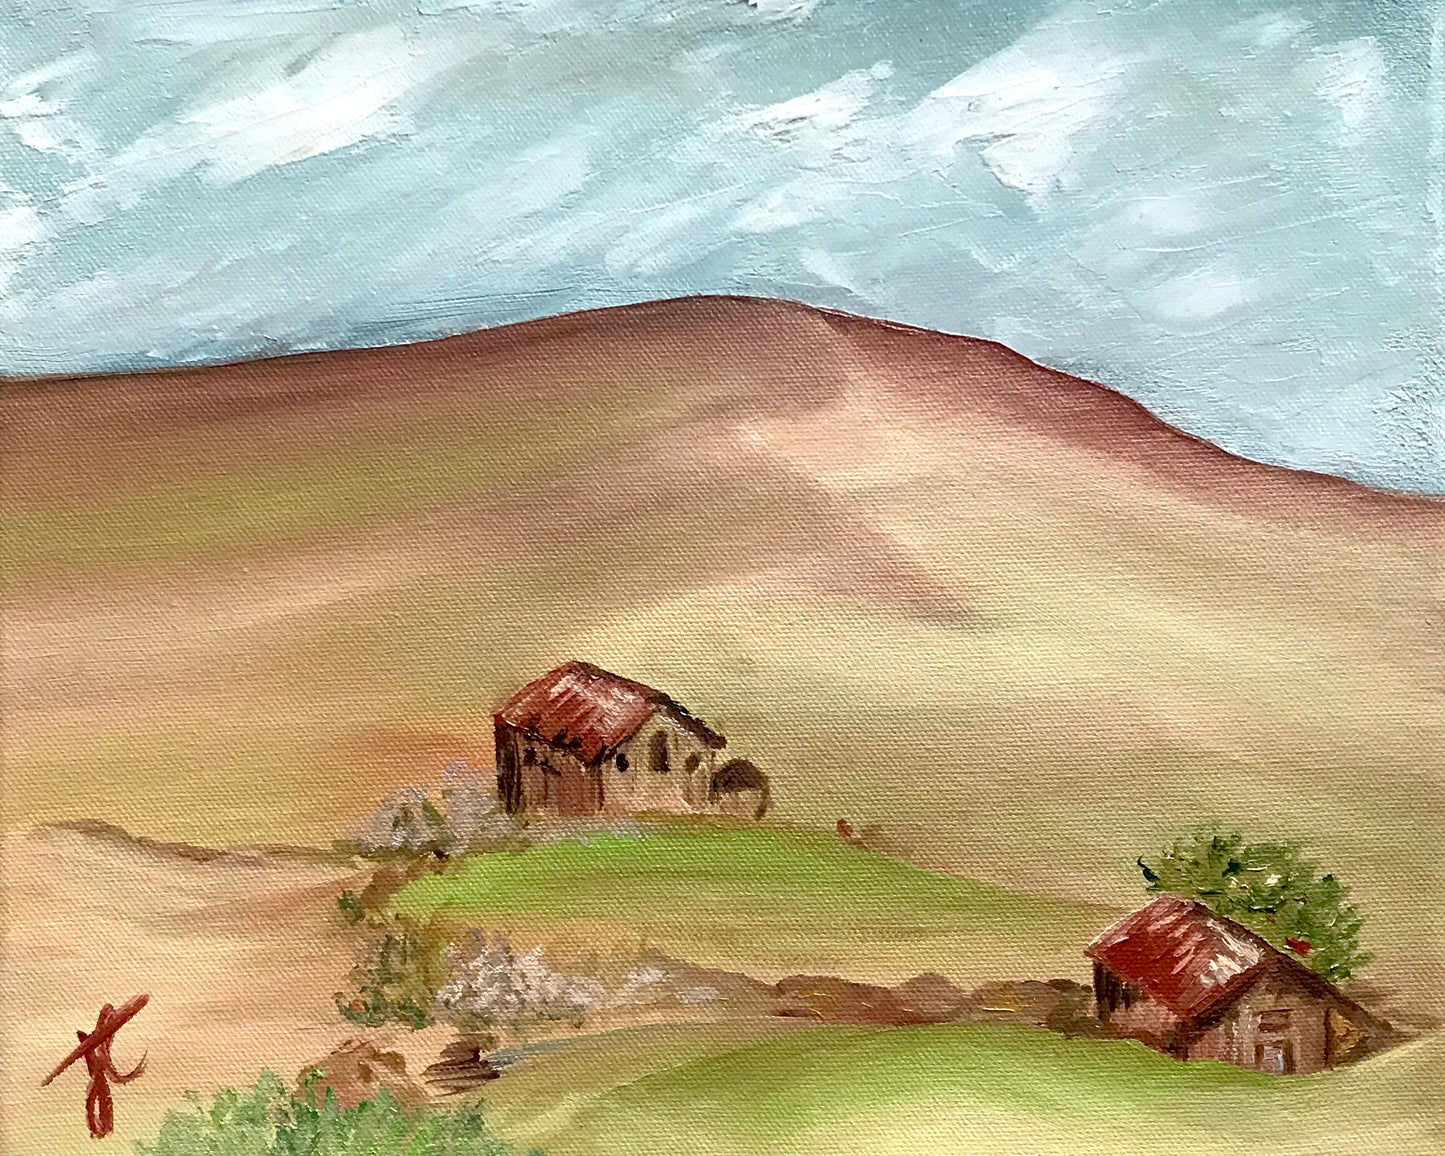 Painting cropped to edge: a hilly landscape with two houses on the hillside.